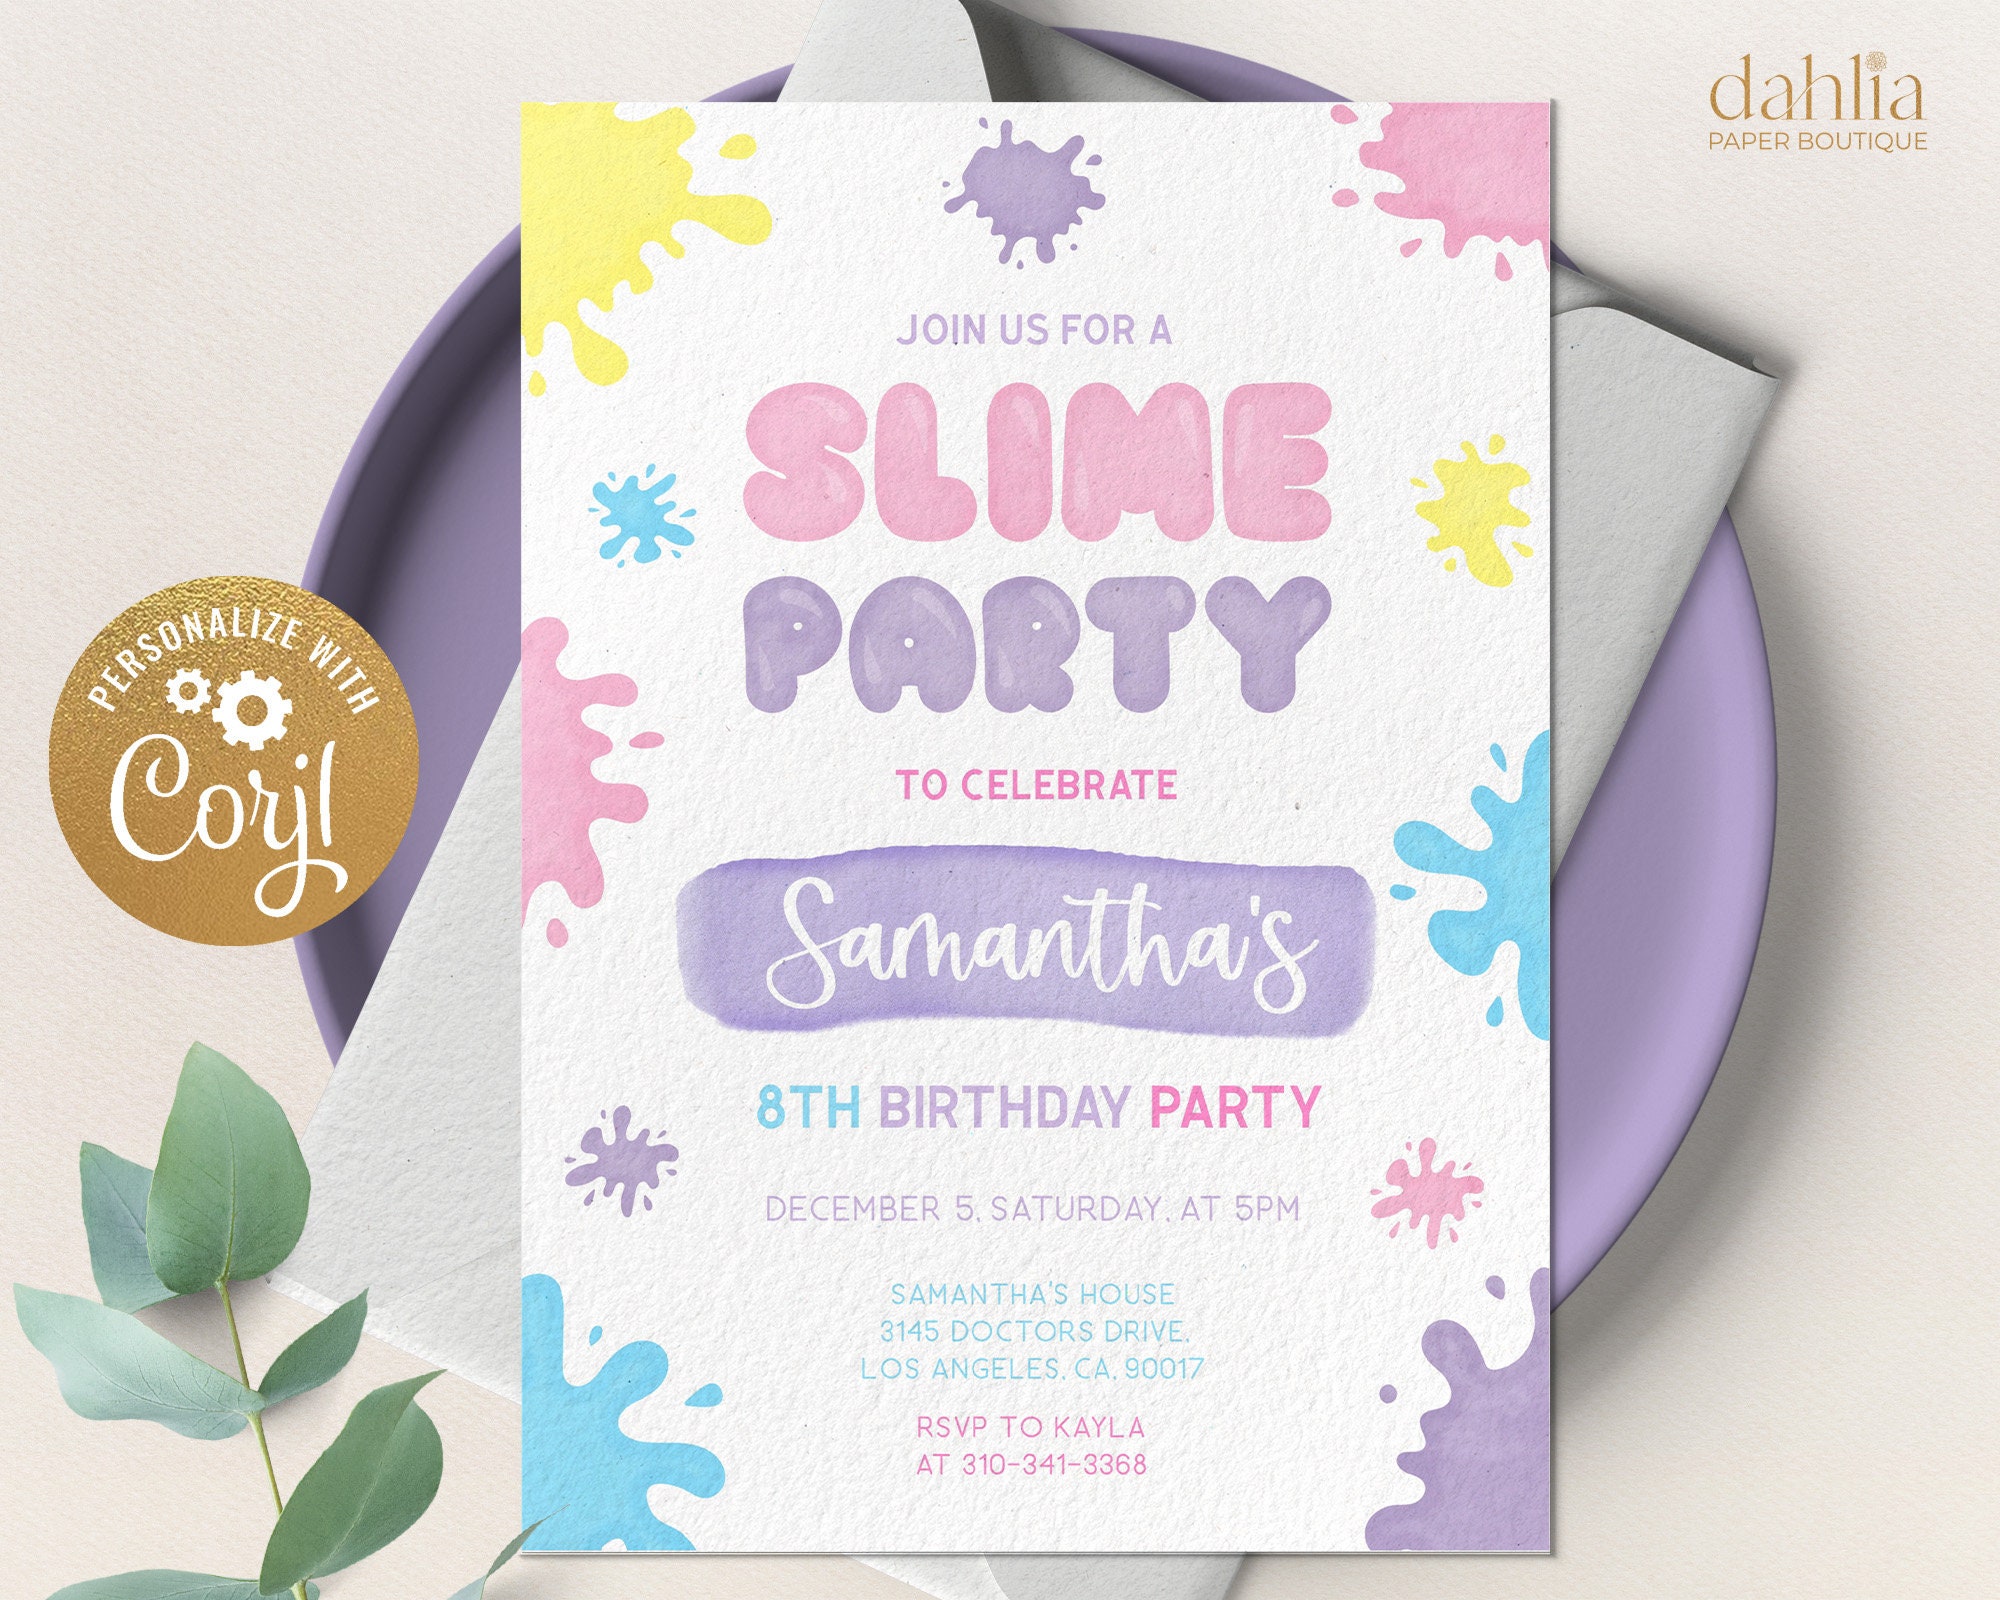 Slime Party Decorations Instant Download Slime Birthday Party Printable  Slime Birthday Party Slime Decorations by Printable Studio -  Israel